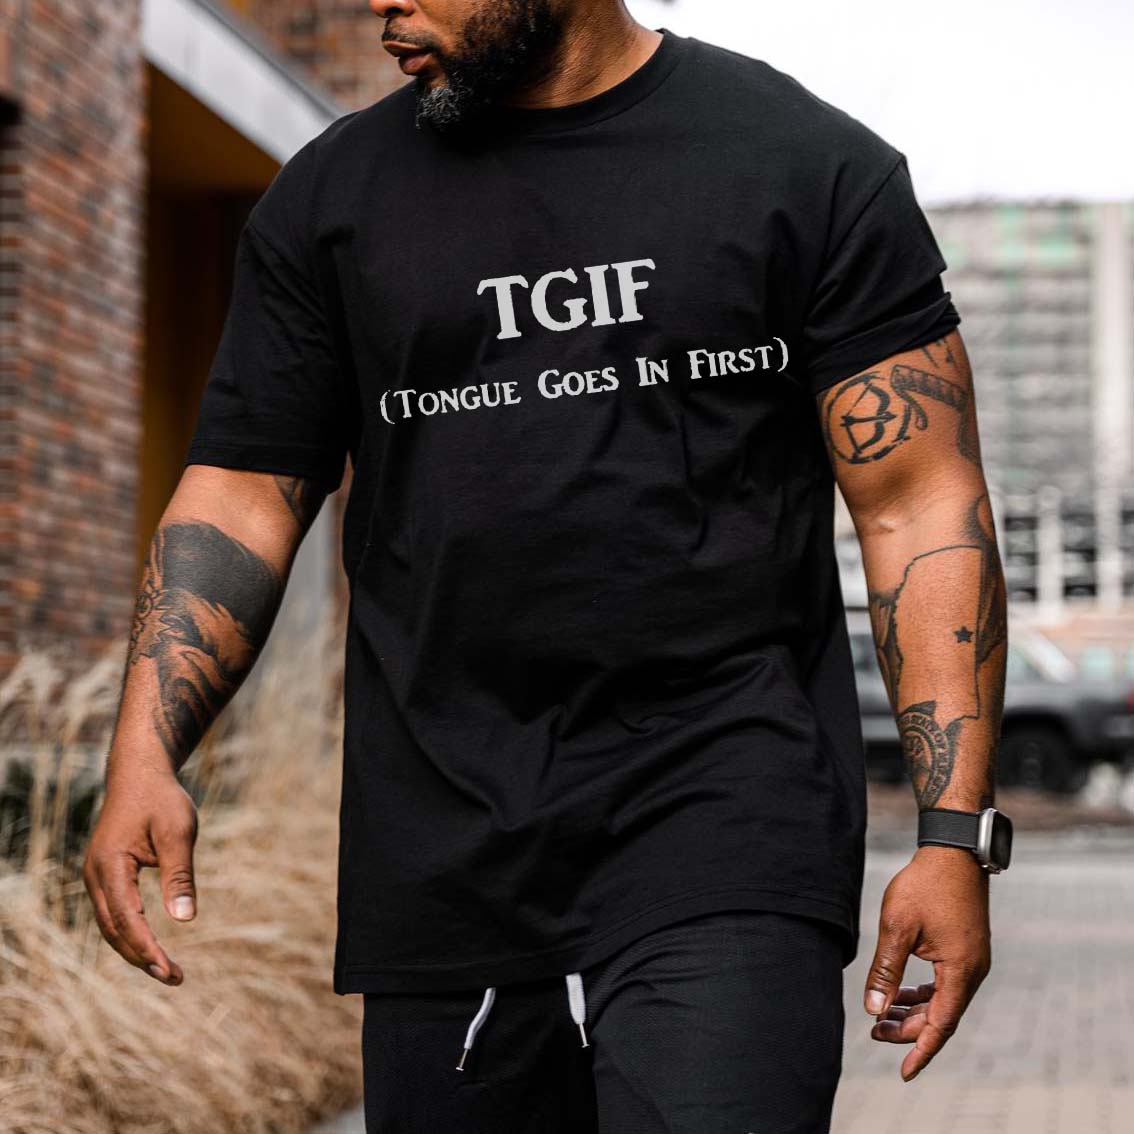 Tgif (Tongue Goes In First) Print Men's T-shirt